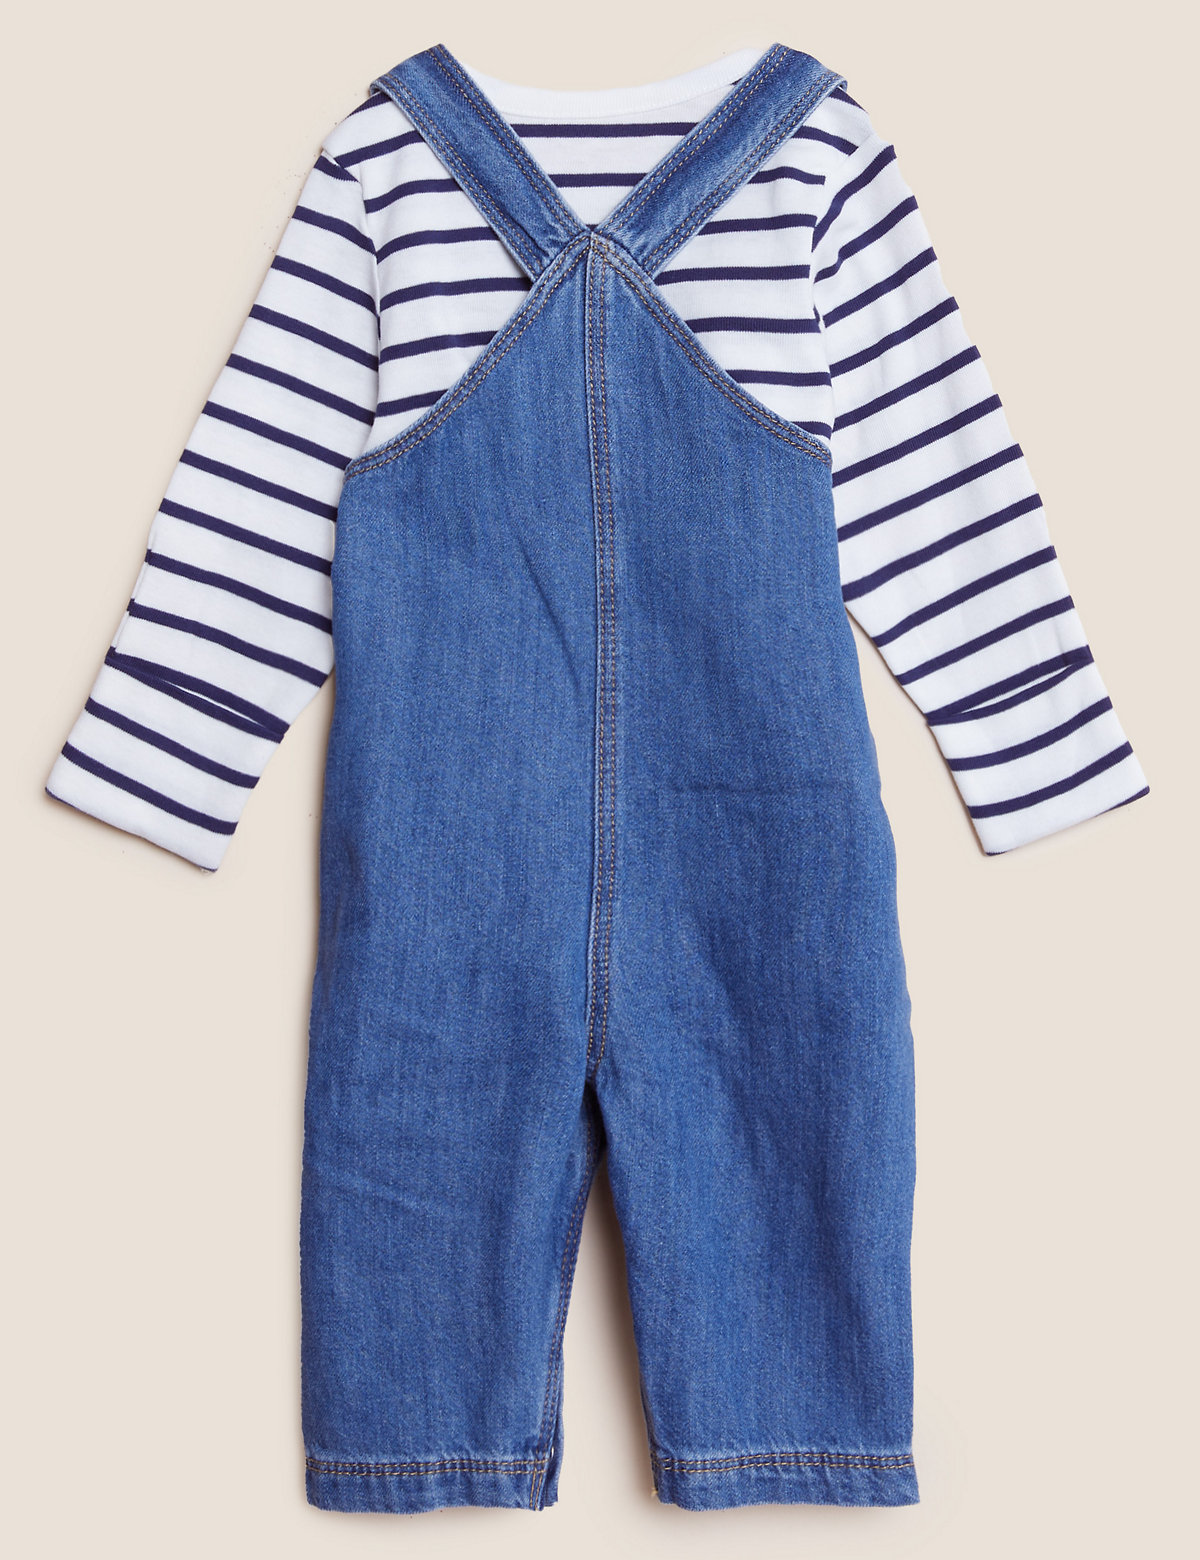 2pc Pure Cotton Denim Dungarees Outfit (0-3 Yrs)